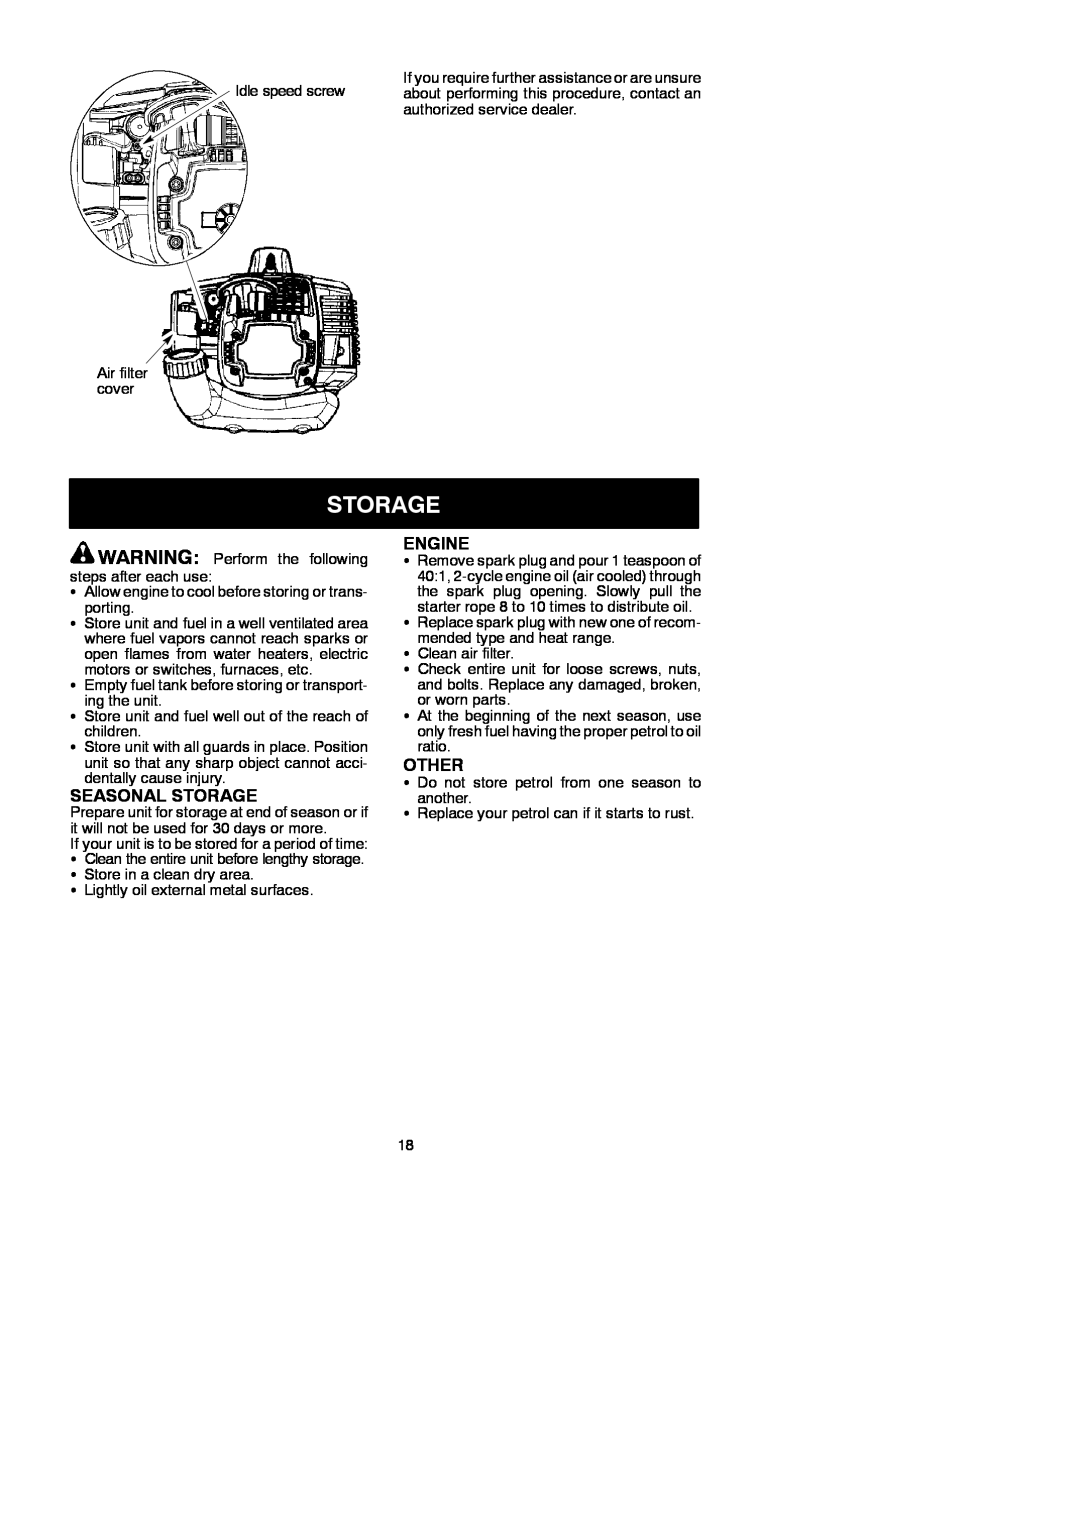 McCulloch 952715745, 433L, 115306026 instruction manual Seasonal Storage, Engine, Other 